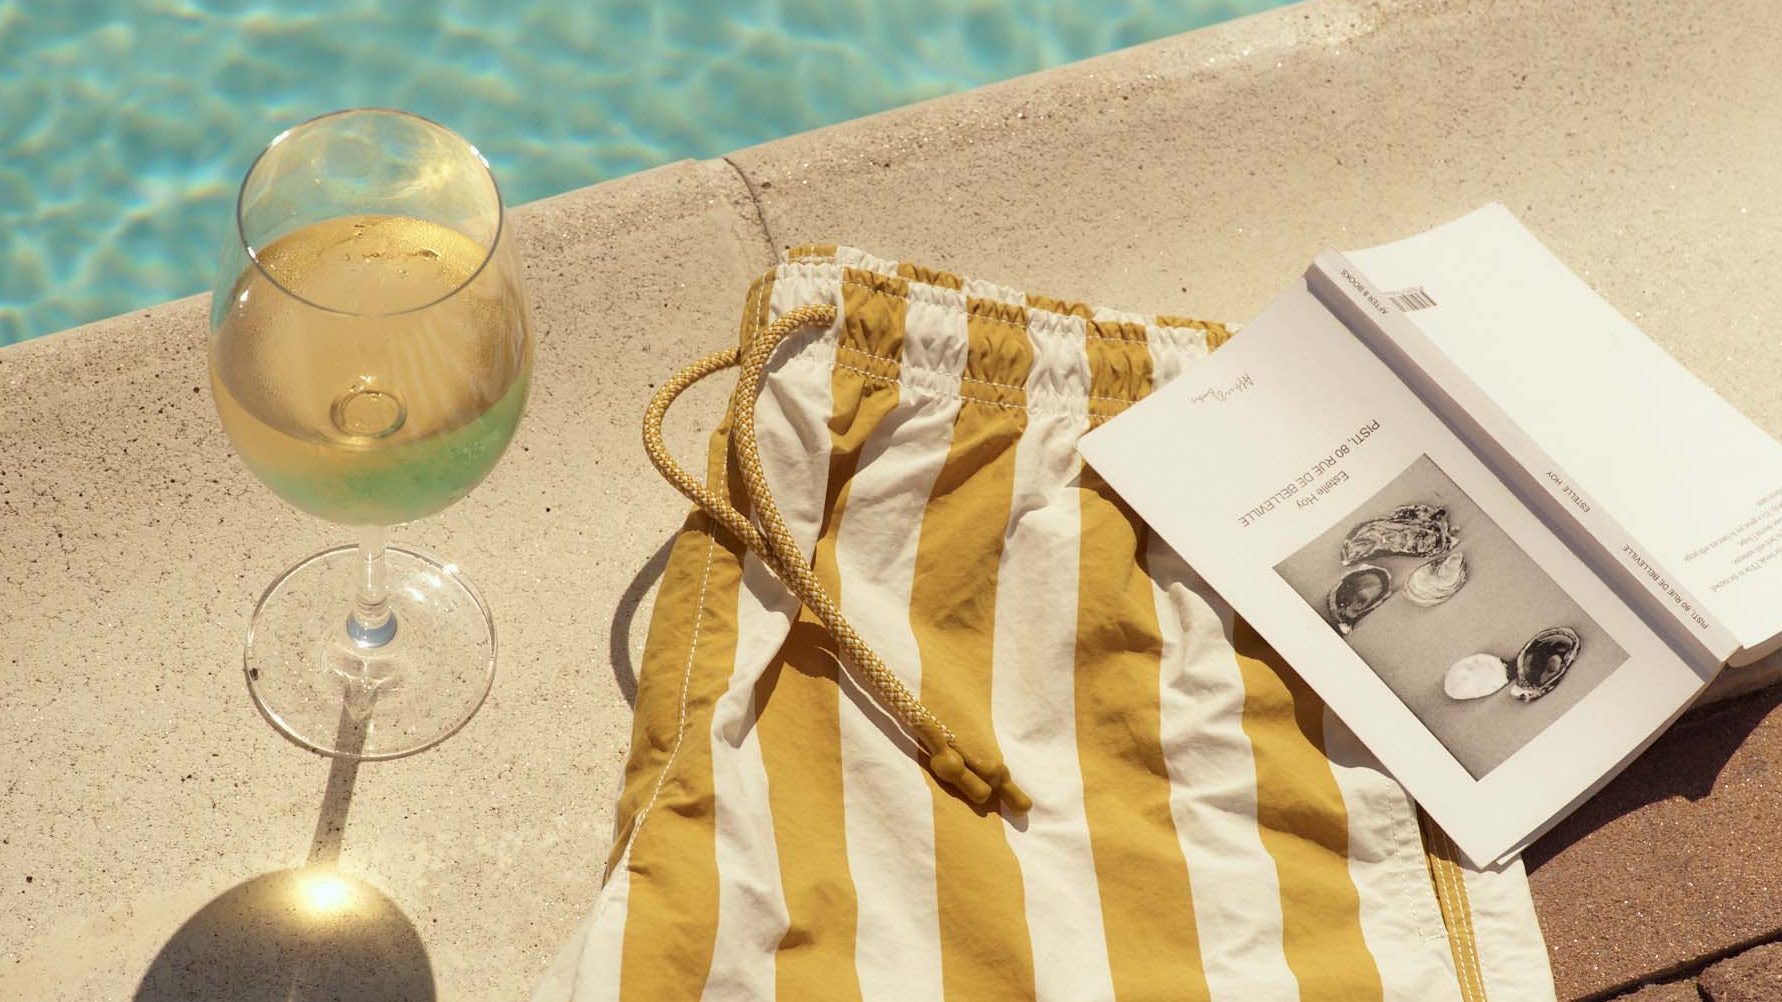 A boxer shorts, a notebook, and a wine glass are placed at the pool's edge.